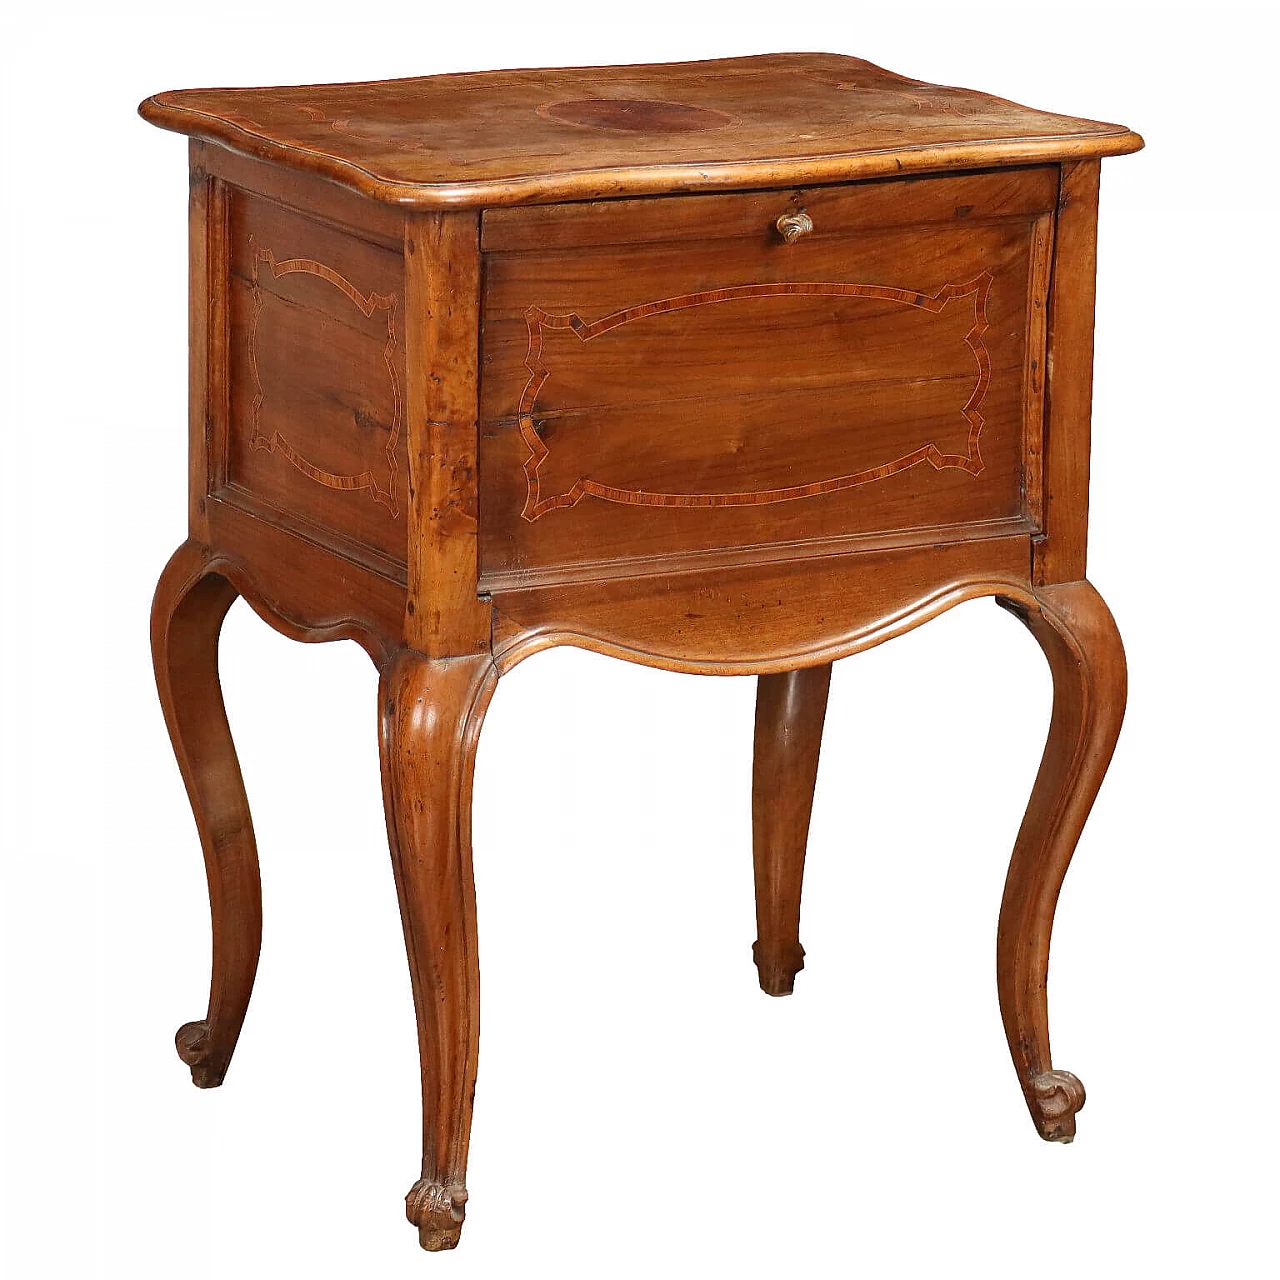 Barocchetto inlaid walnut bedside table with flap door, mid-18th century 1